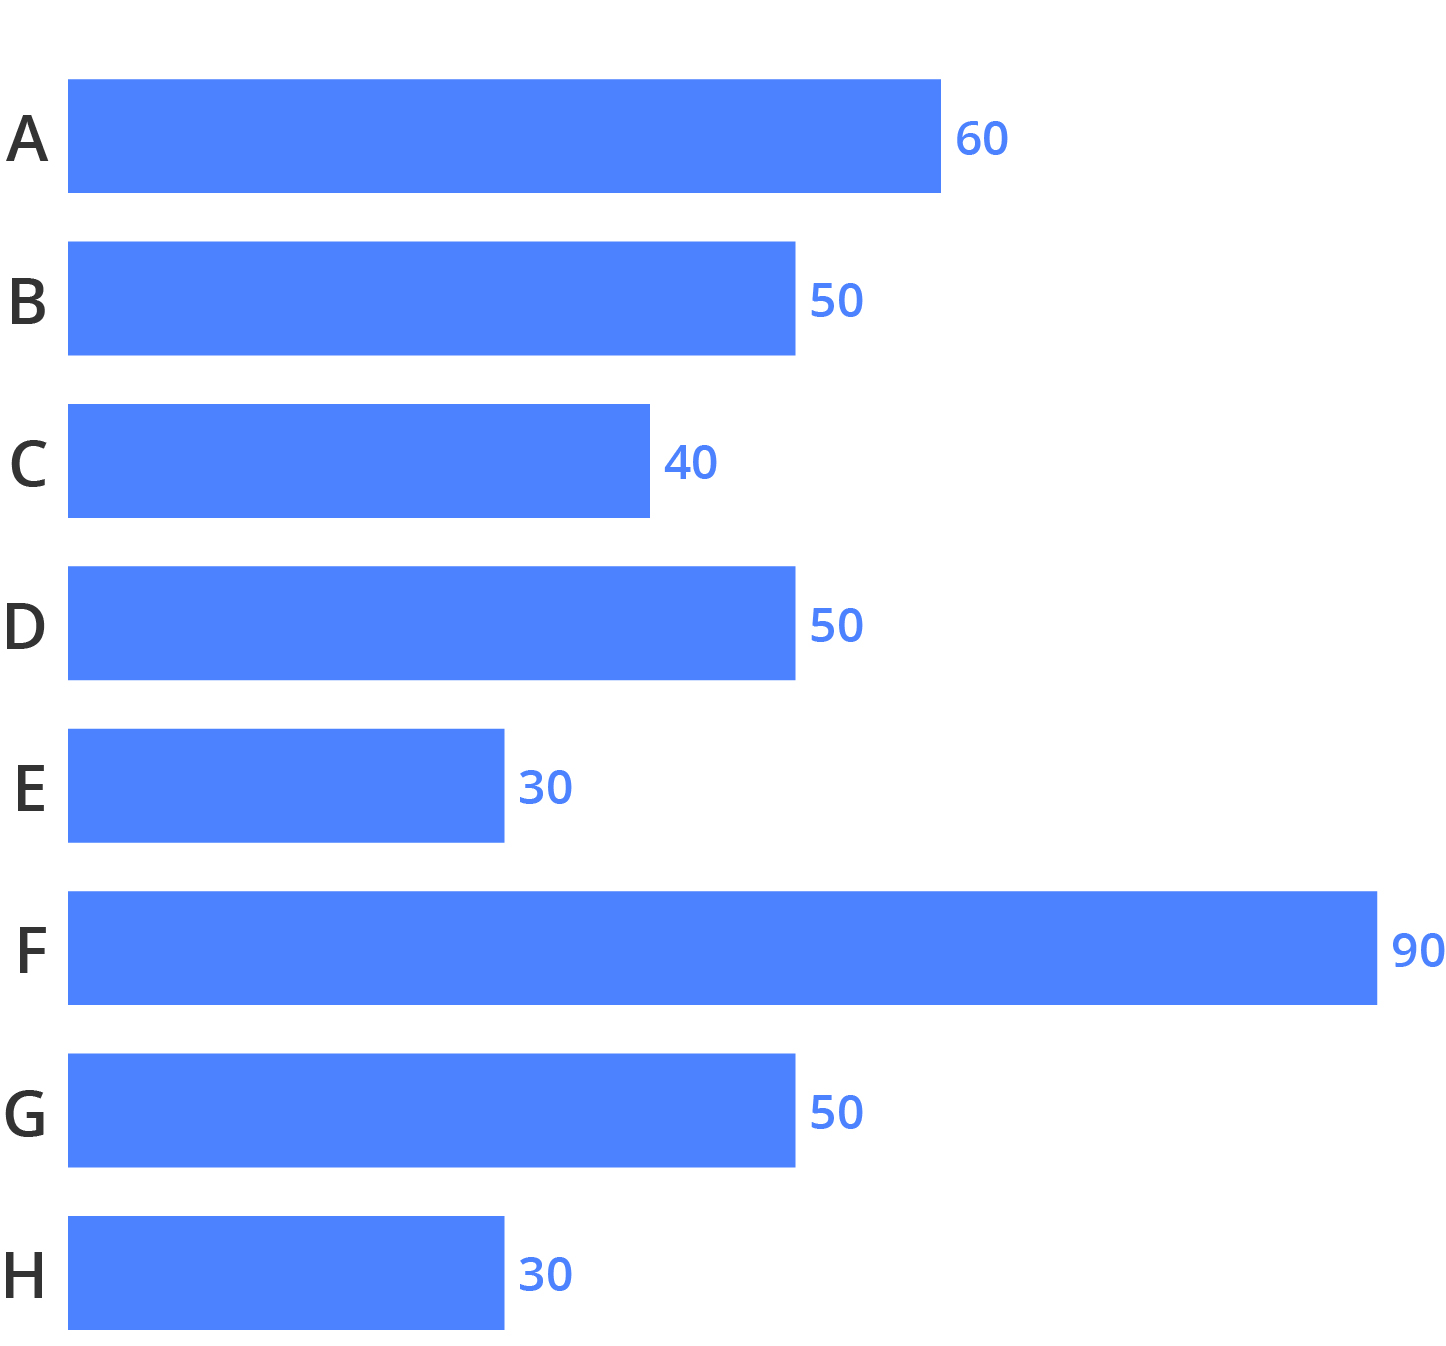 The same bar chart as above, but with value labels for each bar and with the grid lines removed